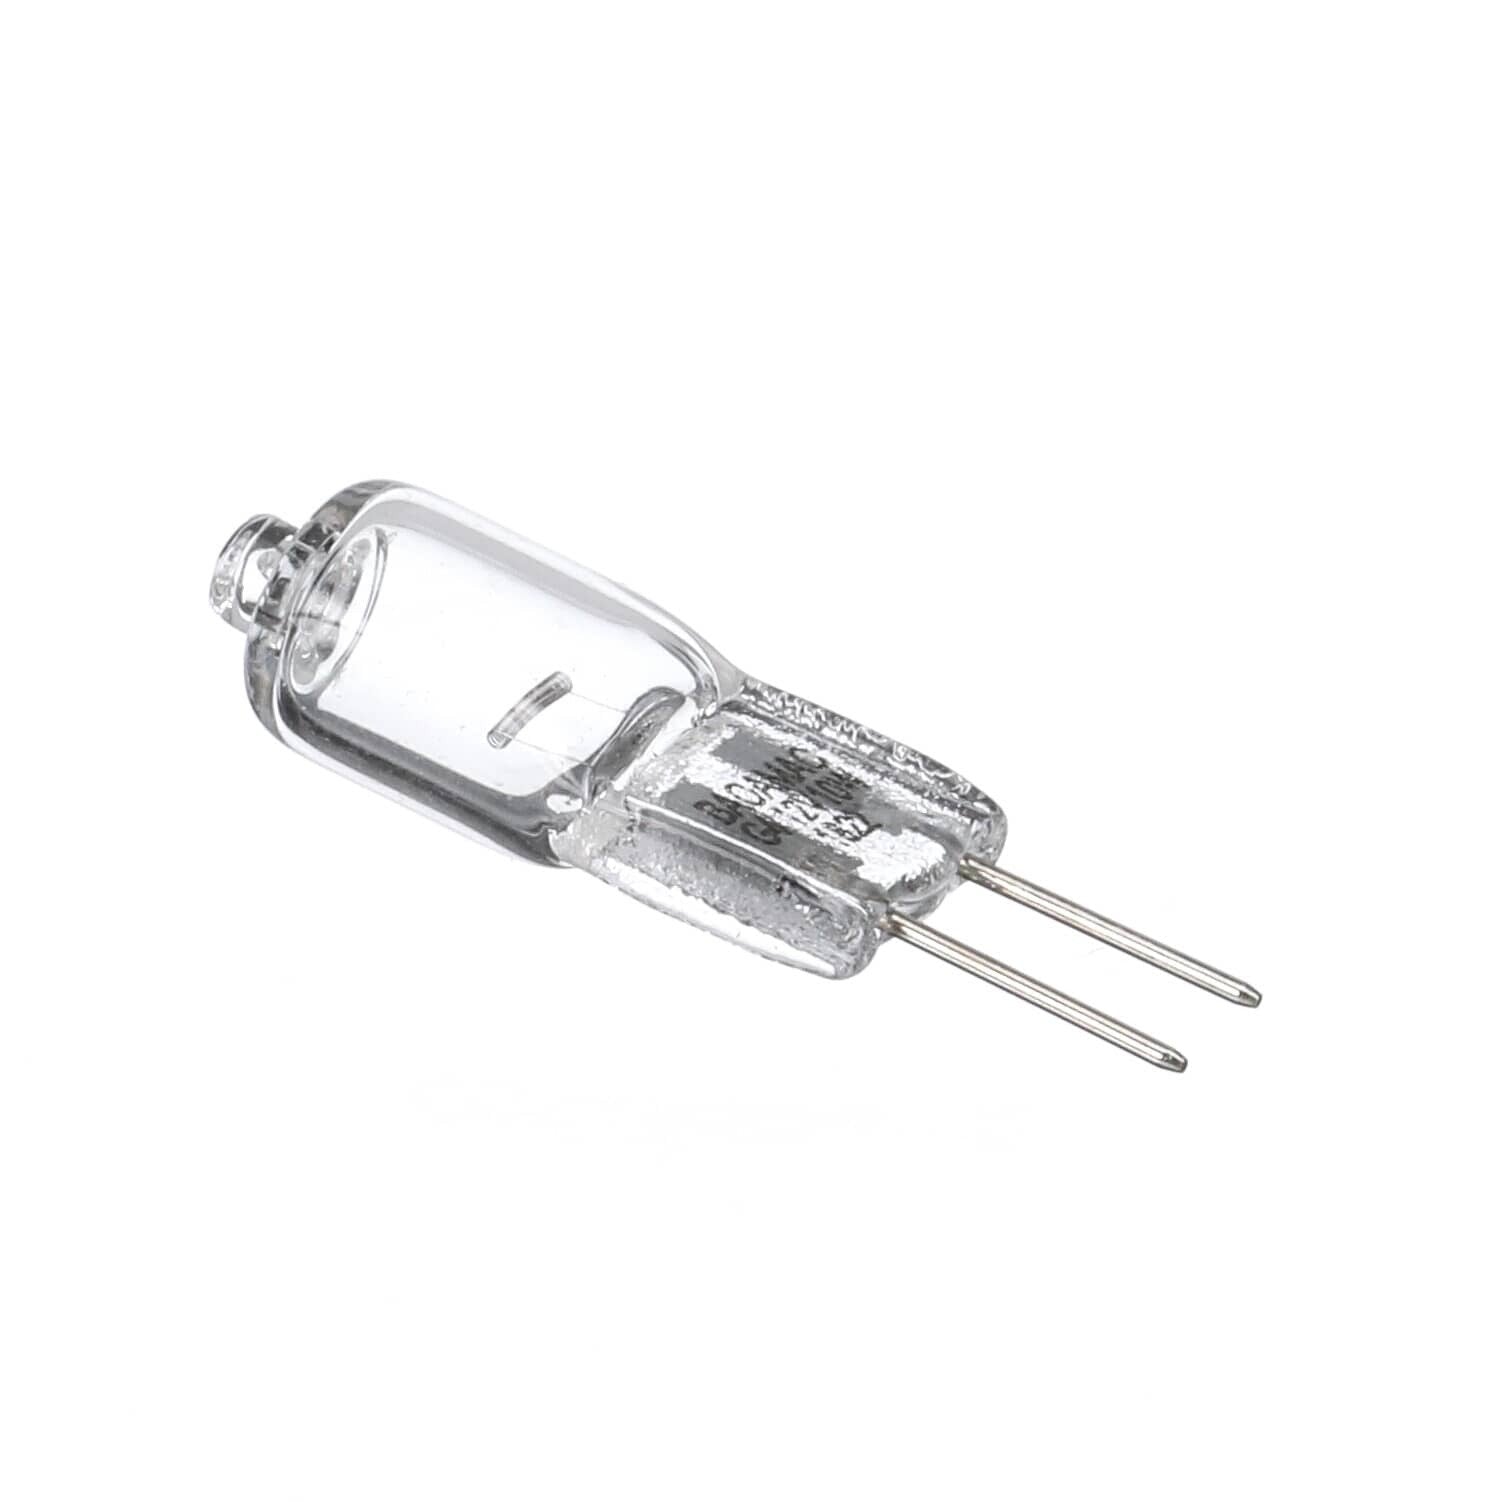 LG Wall Oven Halogen Lamp - 6912W3H001F New